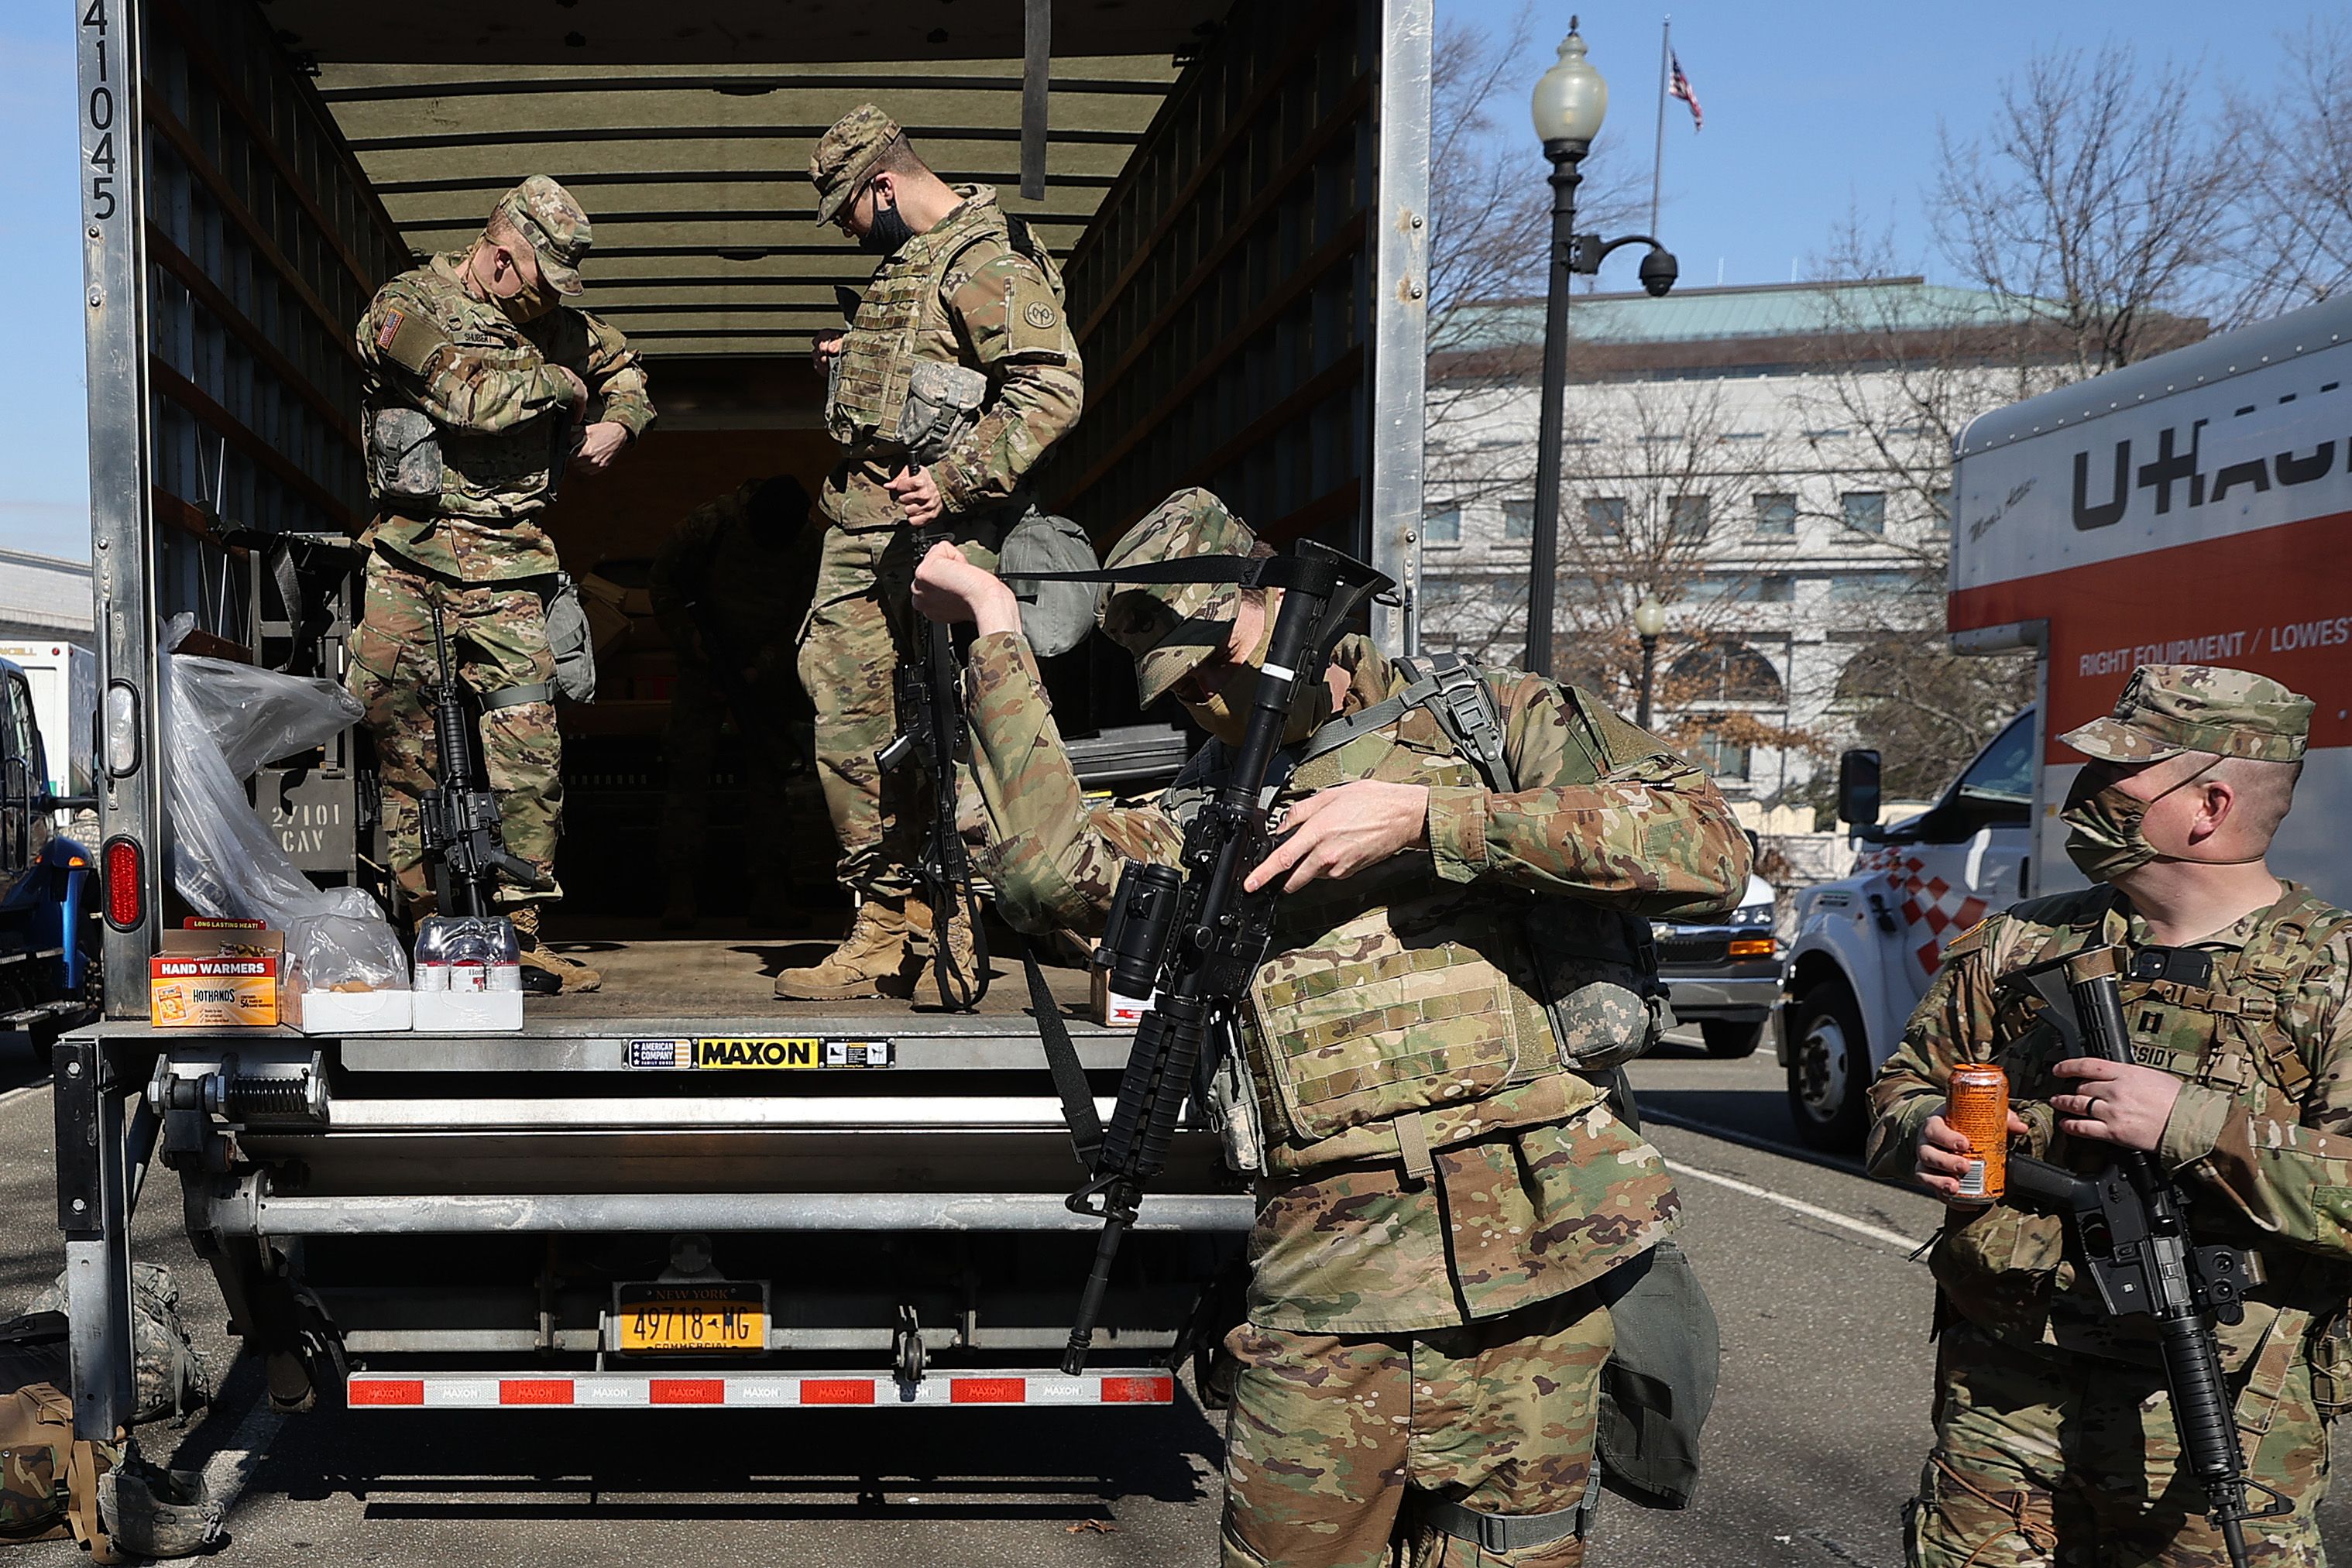 National Guard members collect their weapons on Monday. Photo: Chip Somodevilla/Getty Images